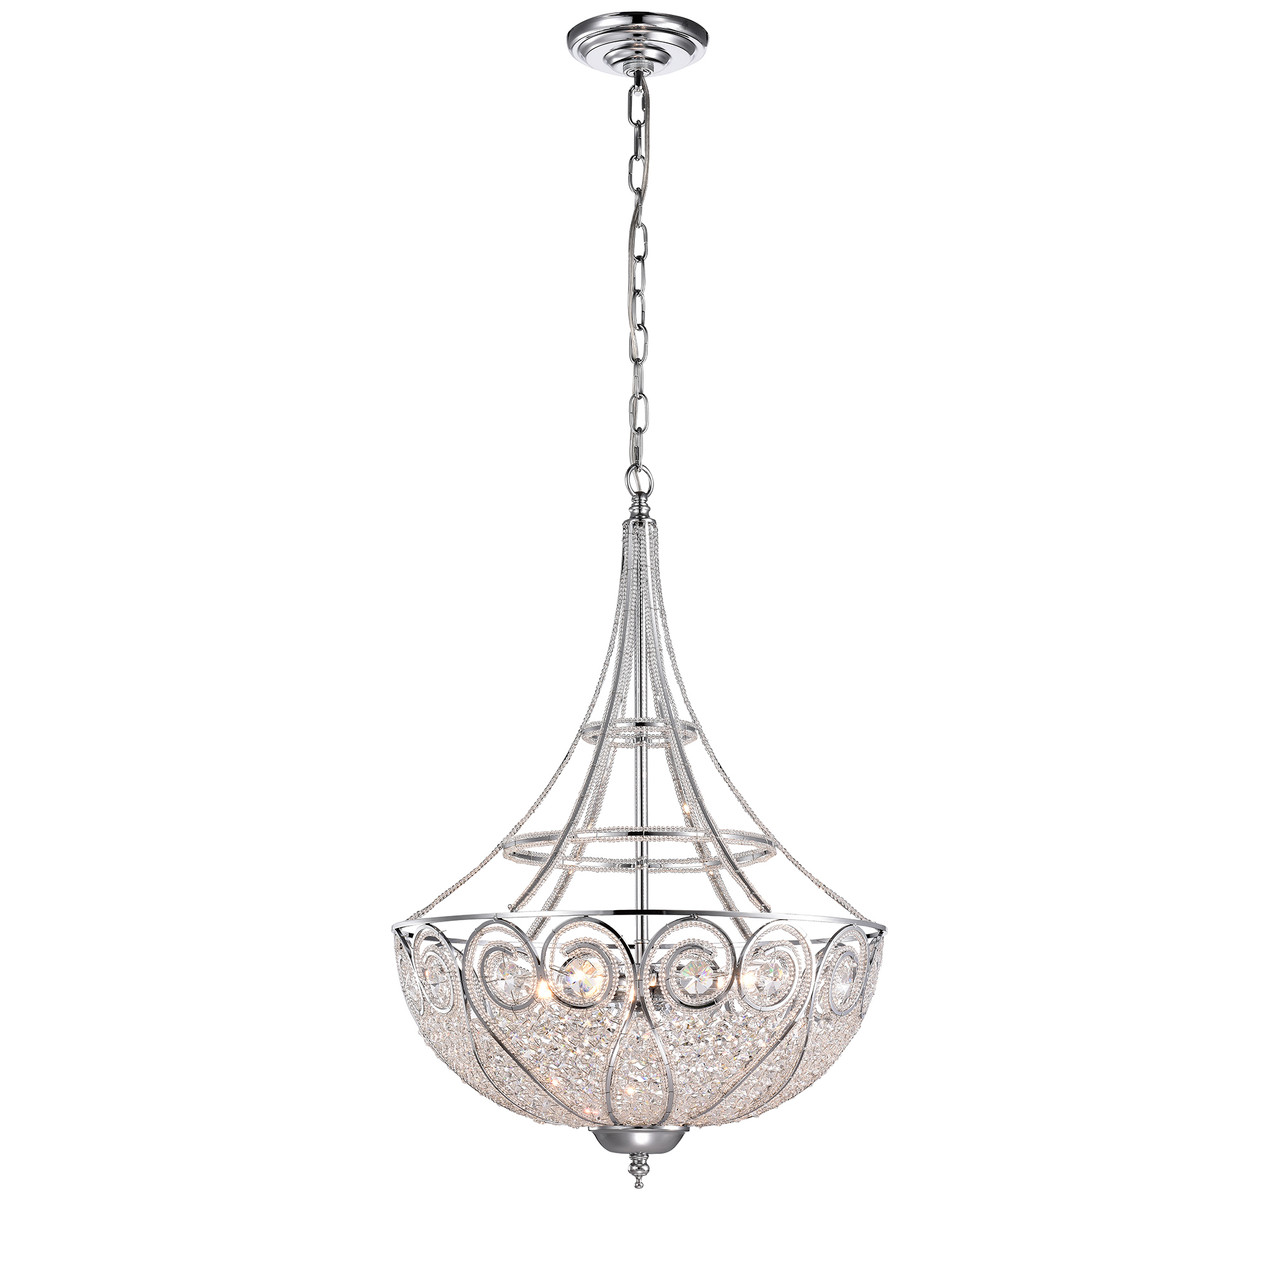 WAREHOUSE OF TIFFANY'S HM8370CH/4A Julio 18 in. 4-Light Indoor Chrome Finish Chandelier with Light Kit